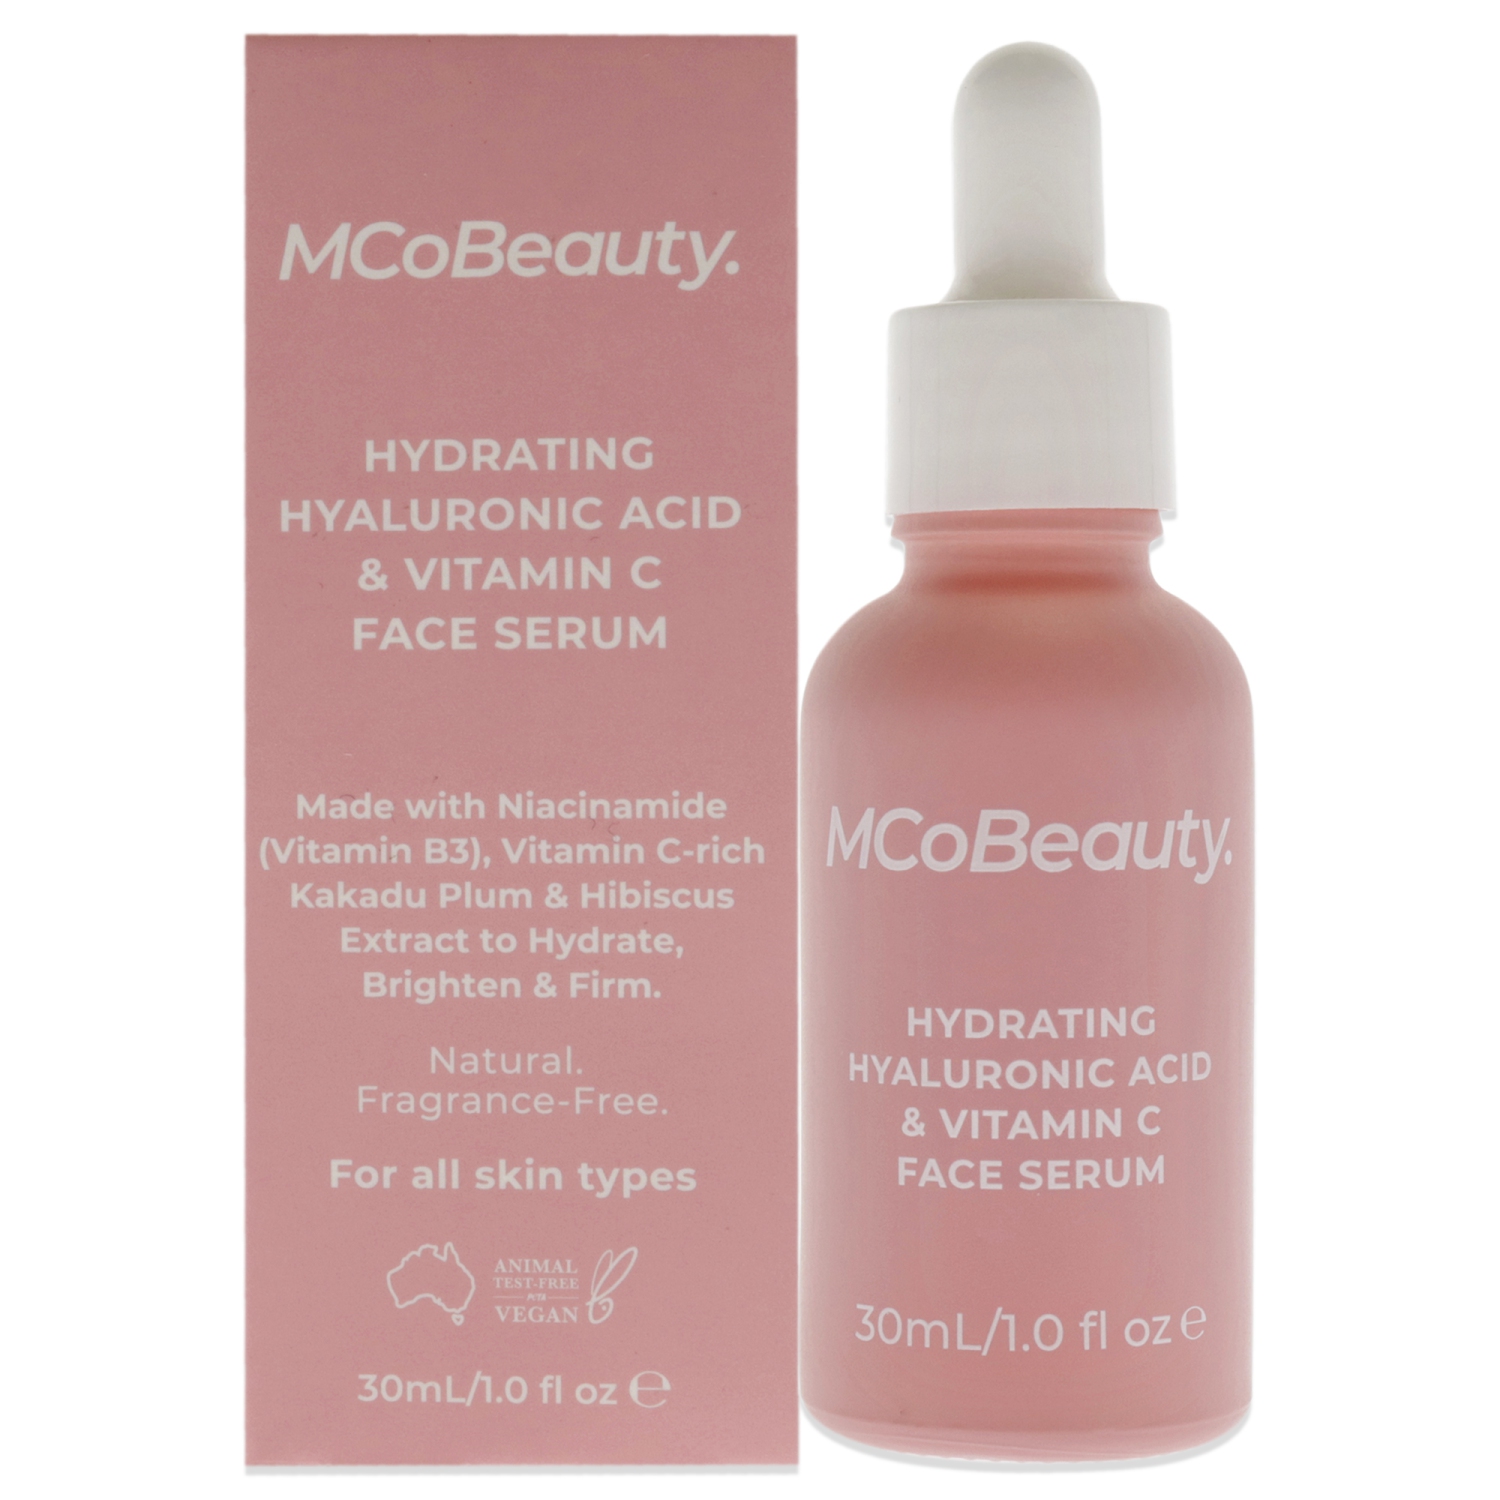 Hydrating Hyaluronic Acid and Vitamin C Face Serum by MCoBeauty for Women - 1 oz Serum